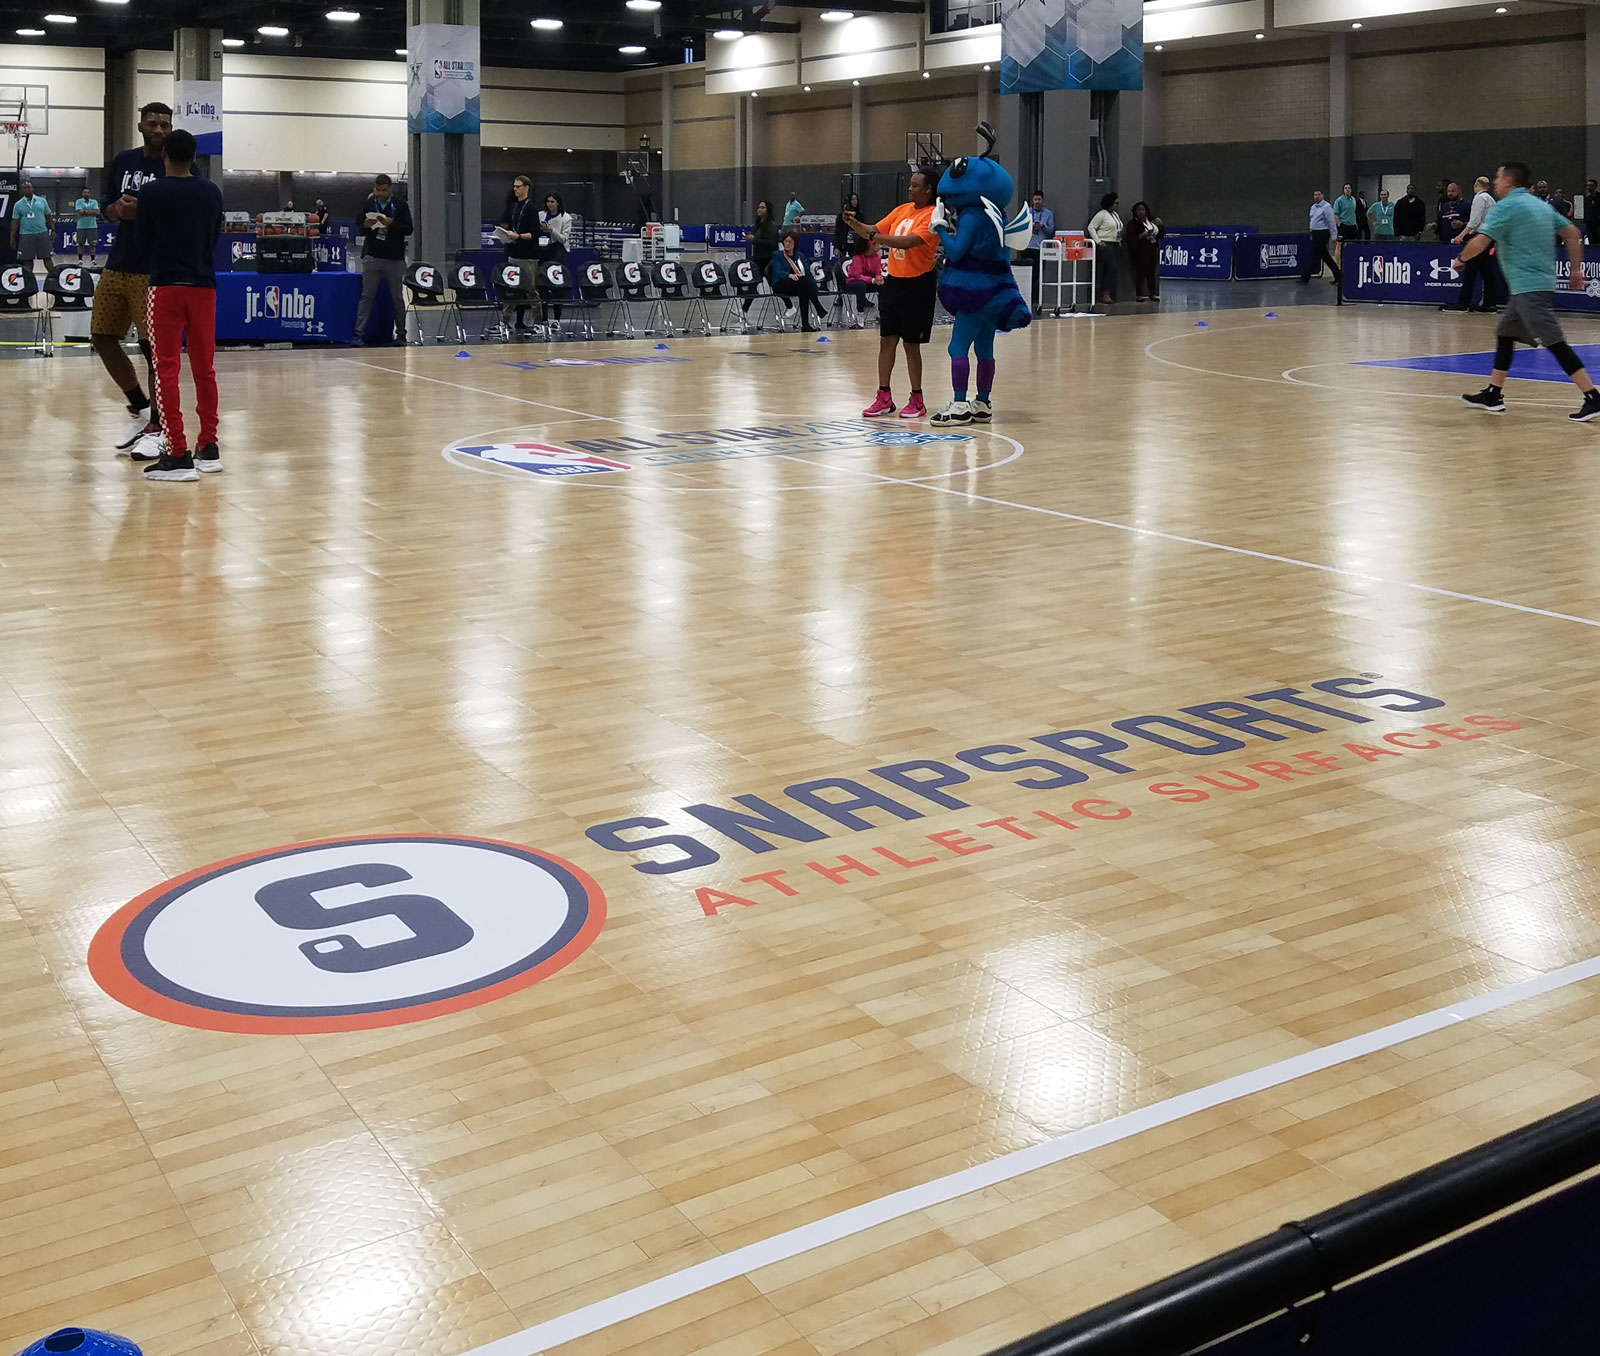 Maple Tuffshield flooring with custom logos from SnapSports